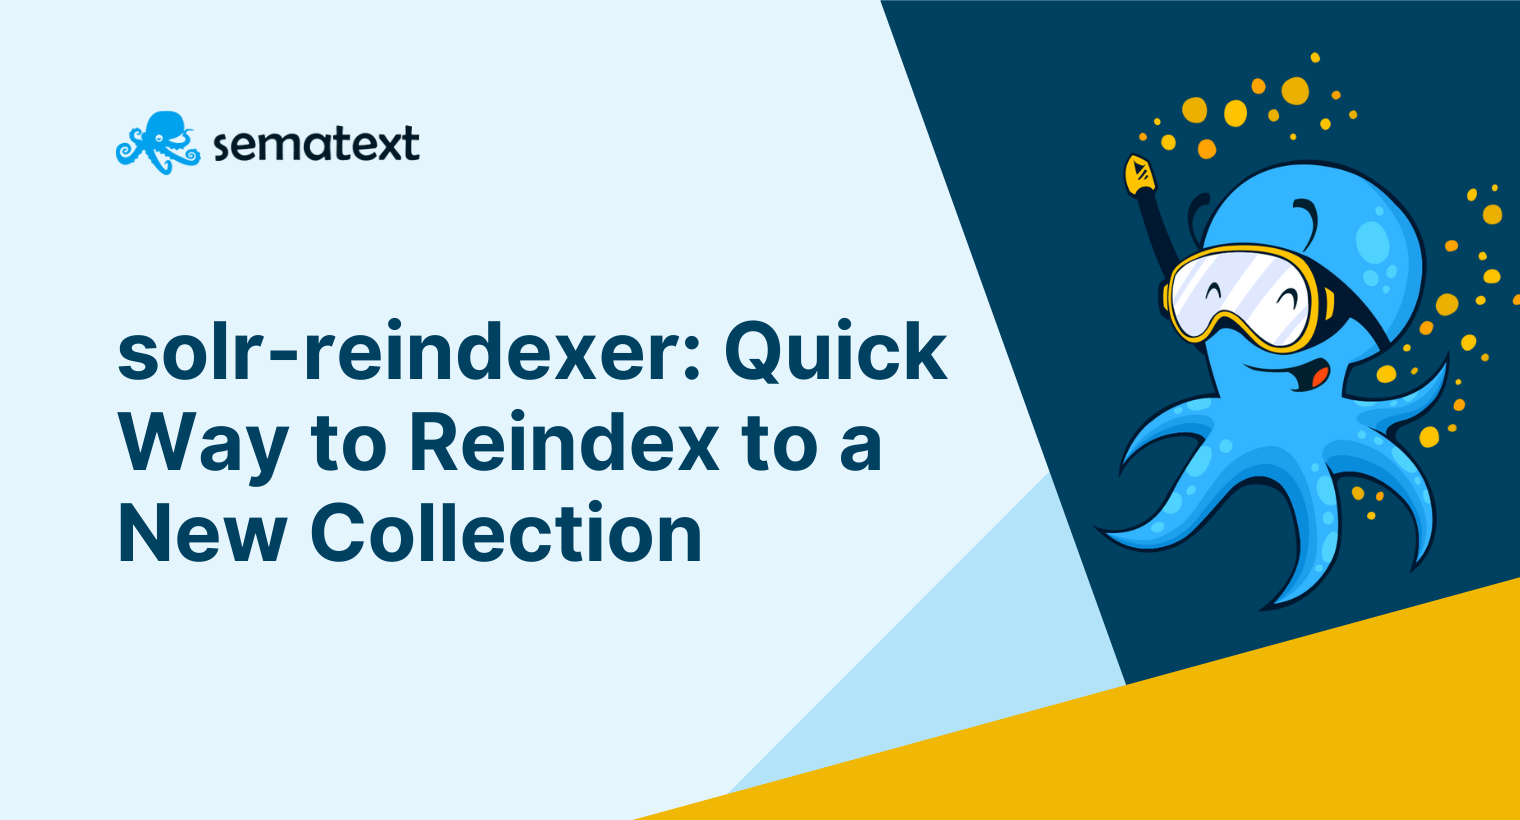 solr-reindexer: Quick Way to Reindex to a New Collection